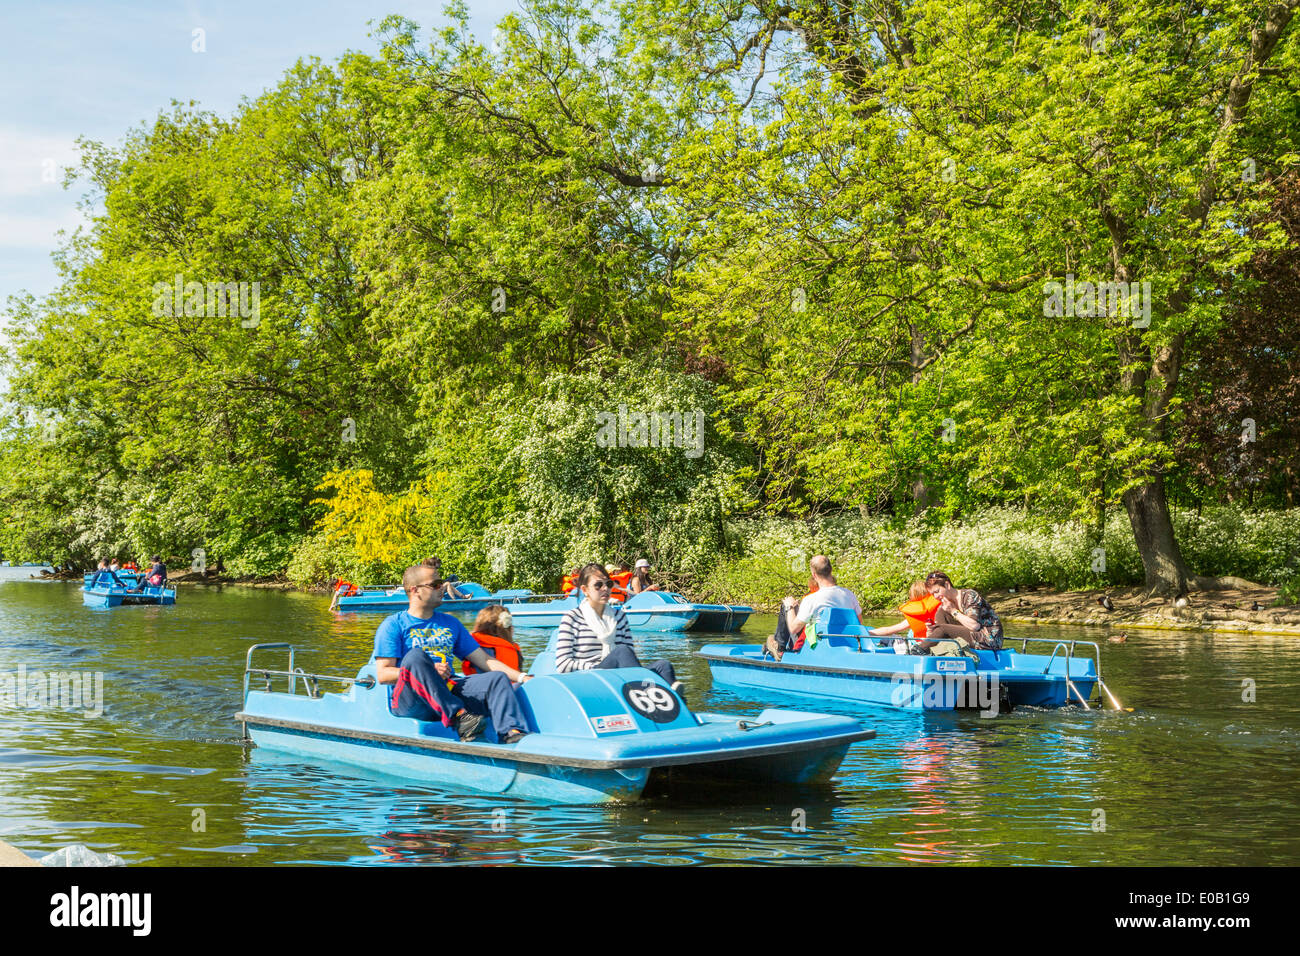 Pedalo boats on the lake in Regents Park London,England UK Stock Photo